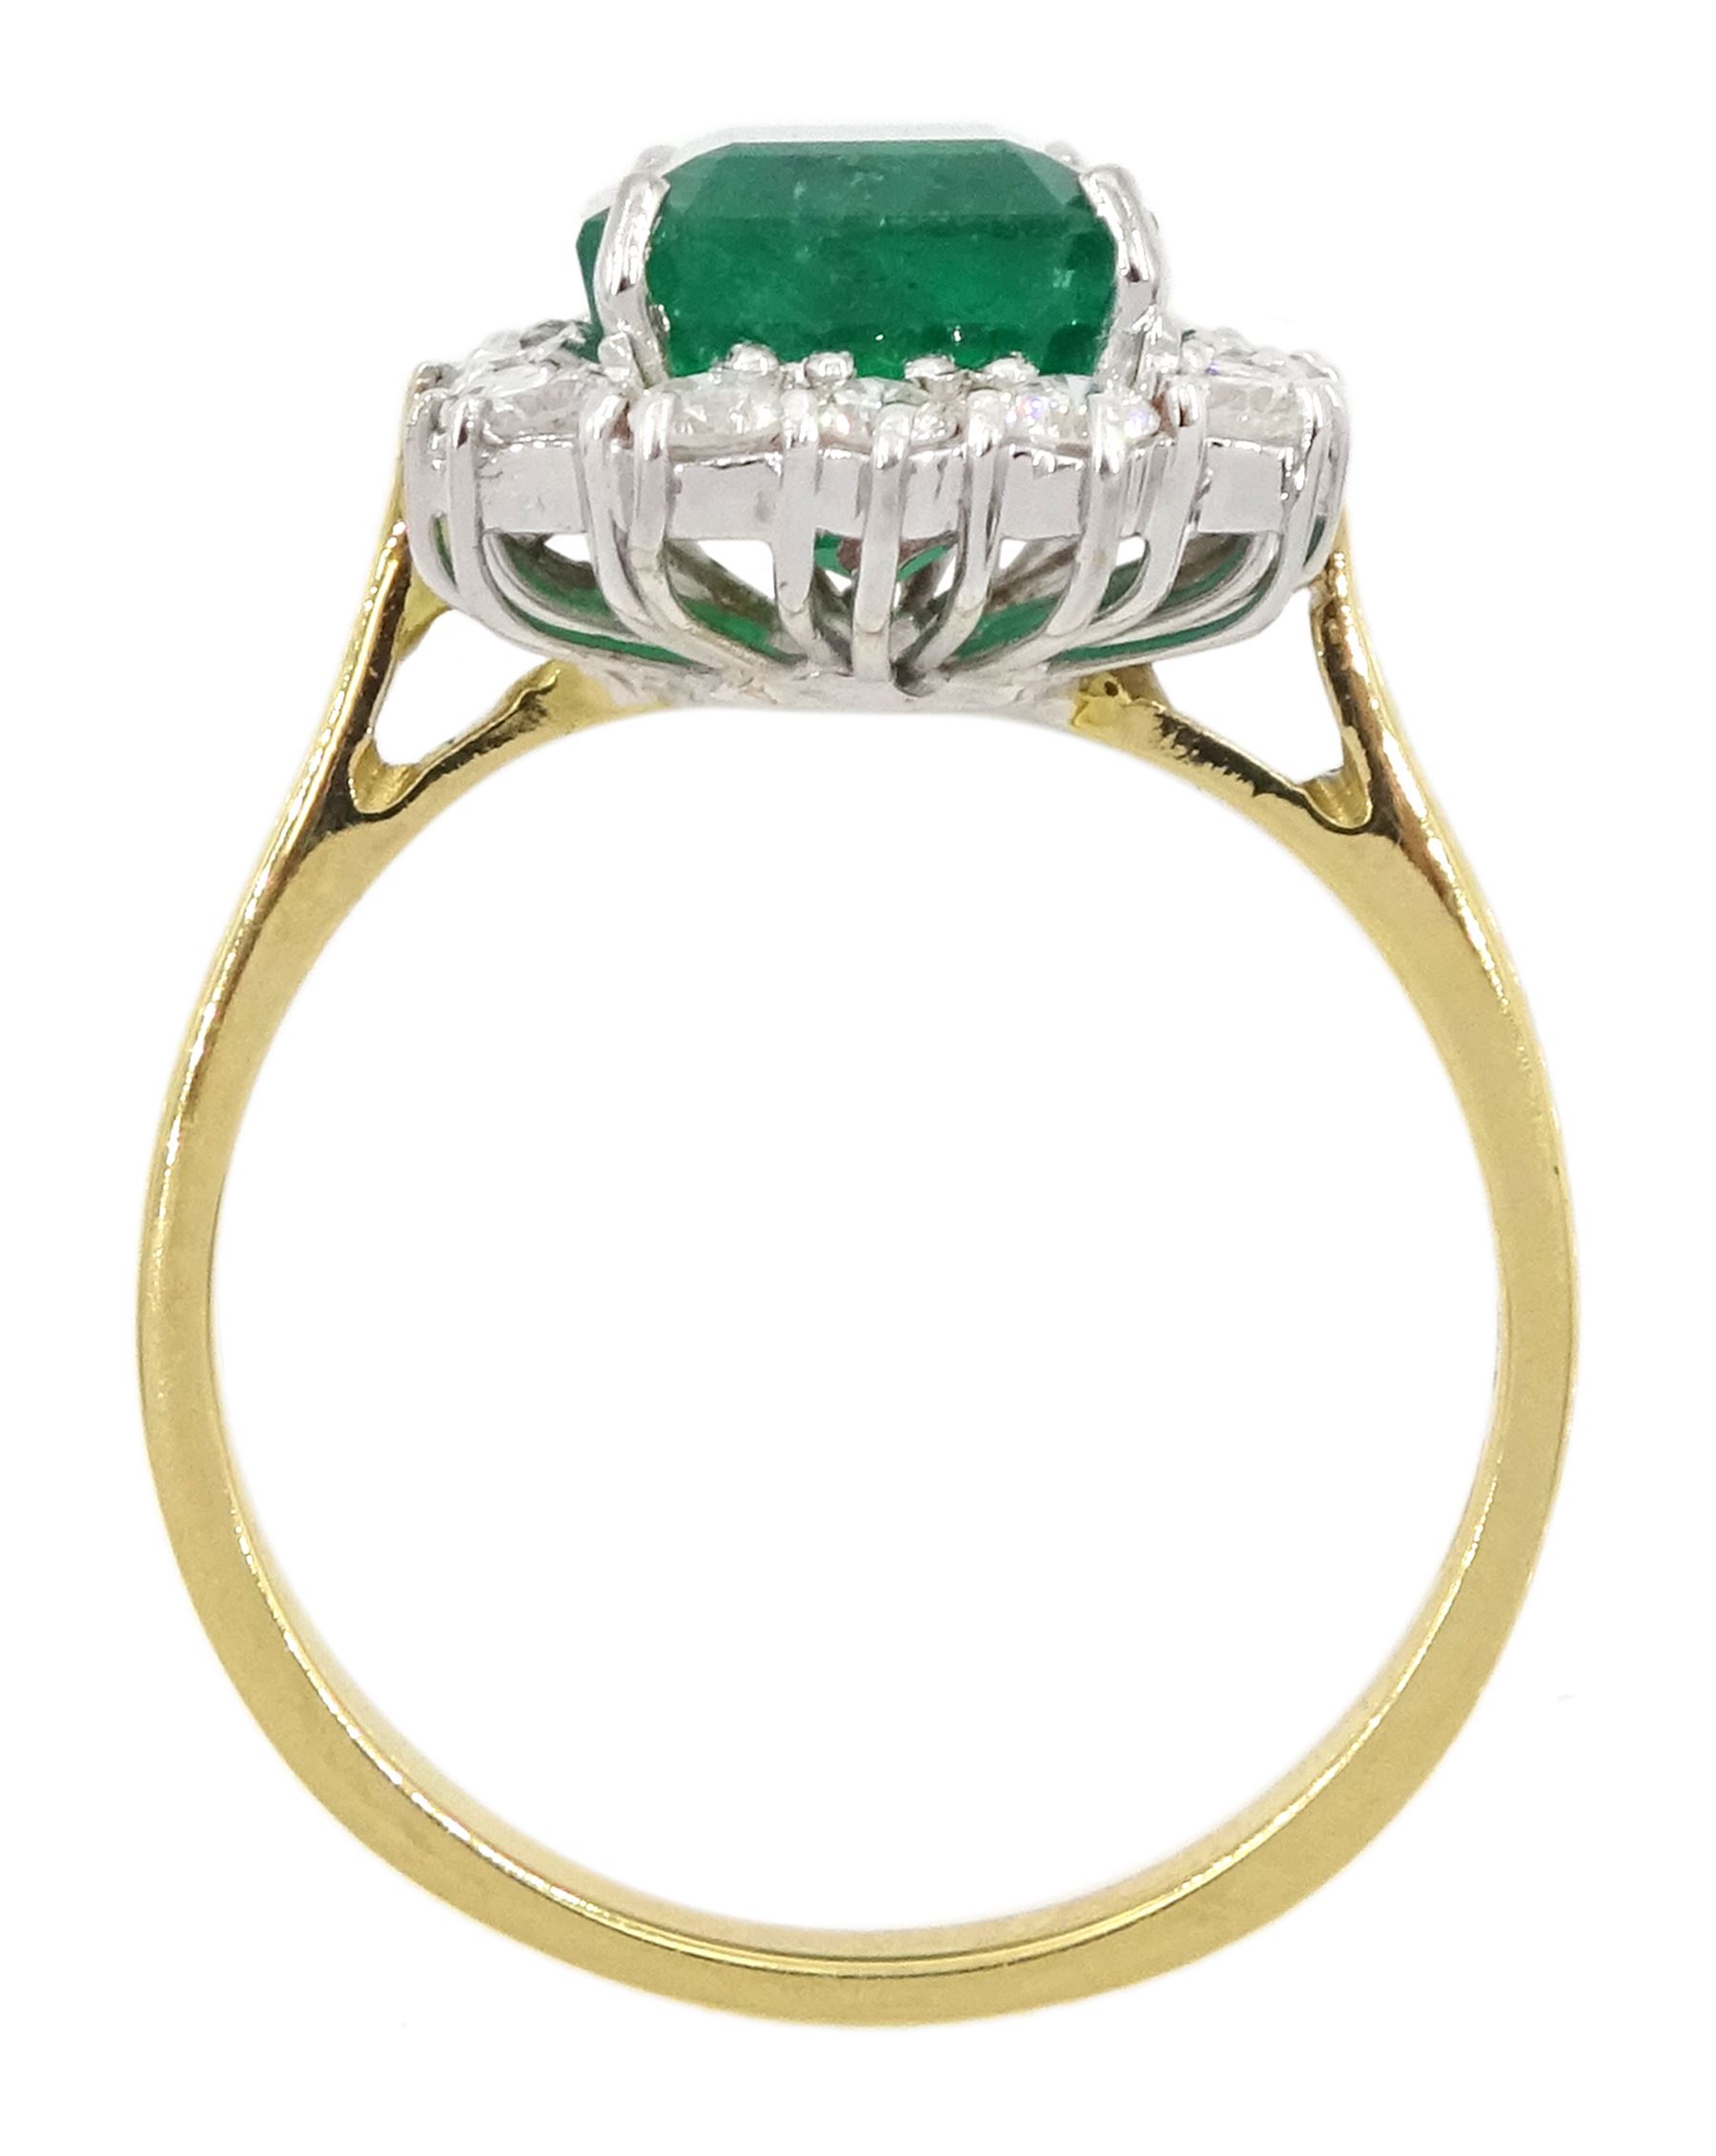 18ct gold emerald cut emerald and round brilliant cut diamond cluster ring - Image 4 of 4